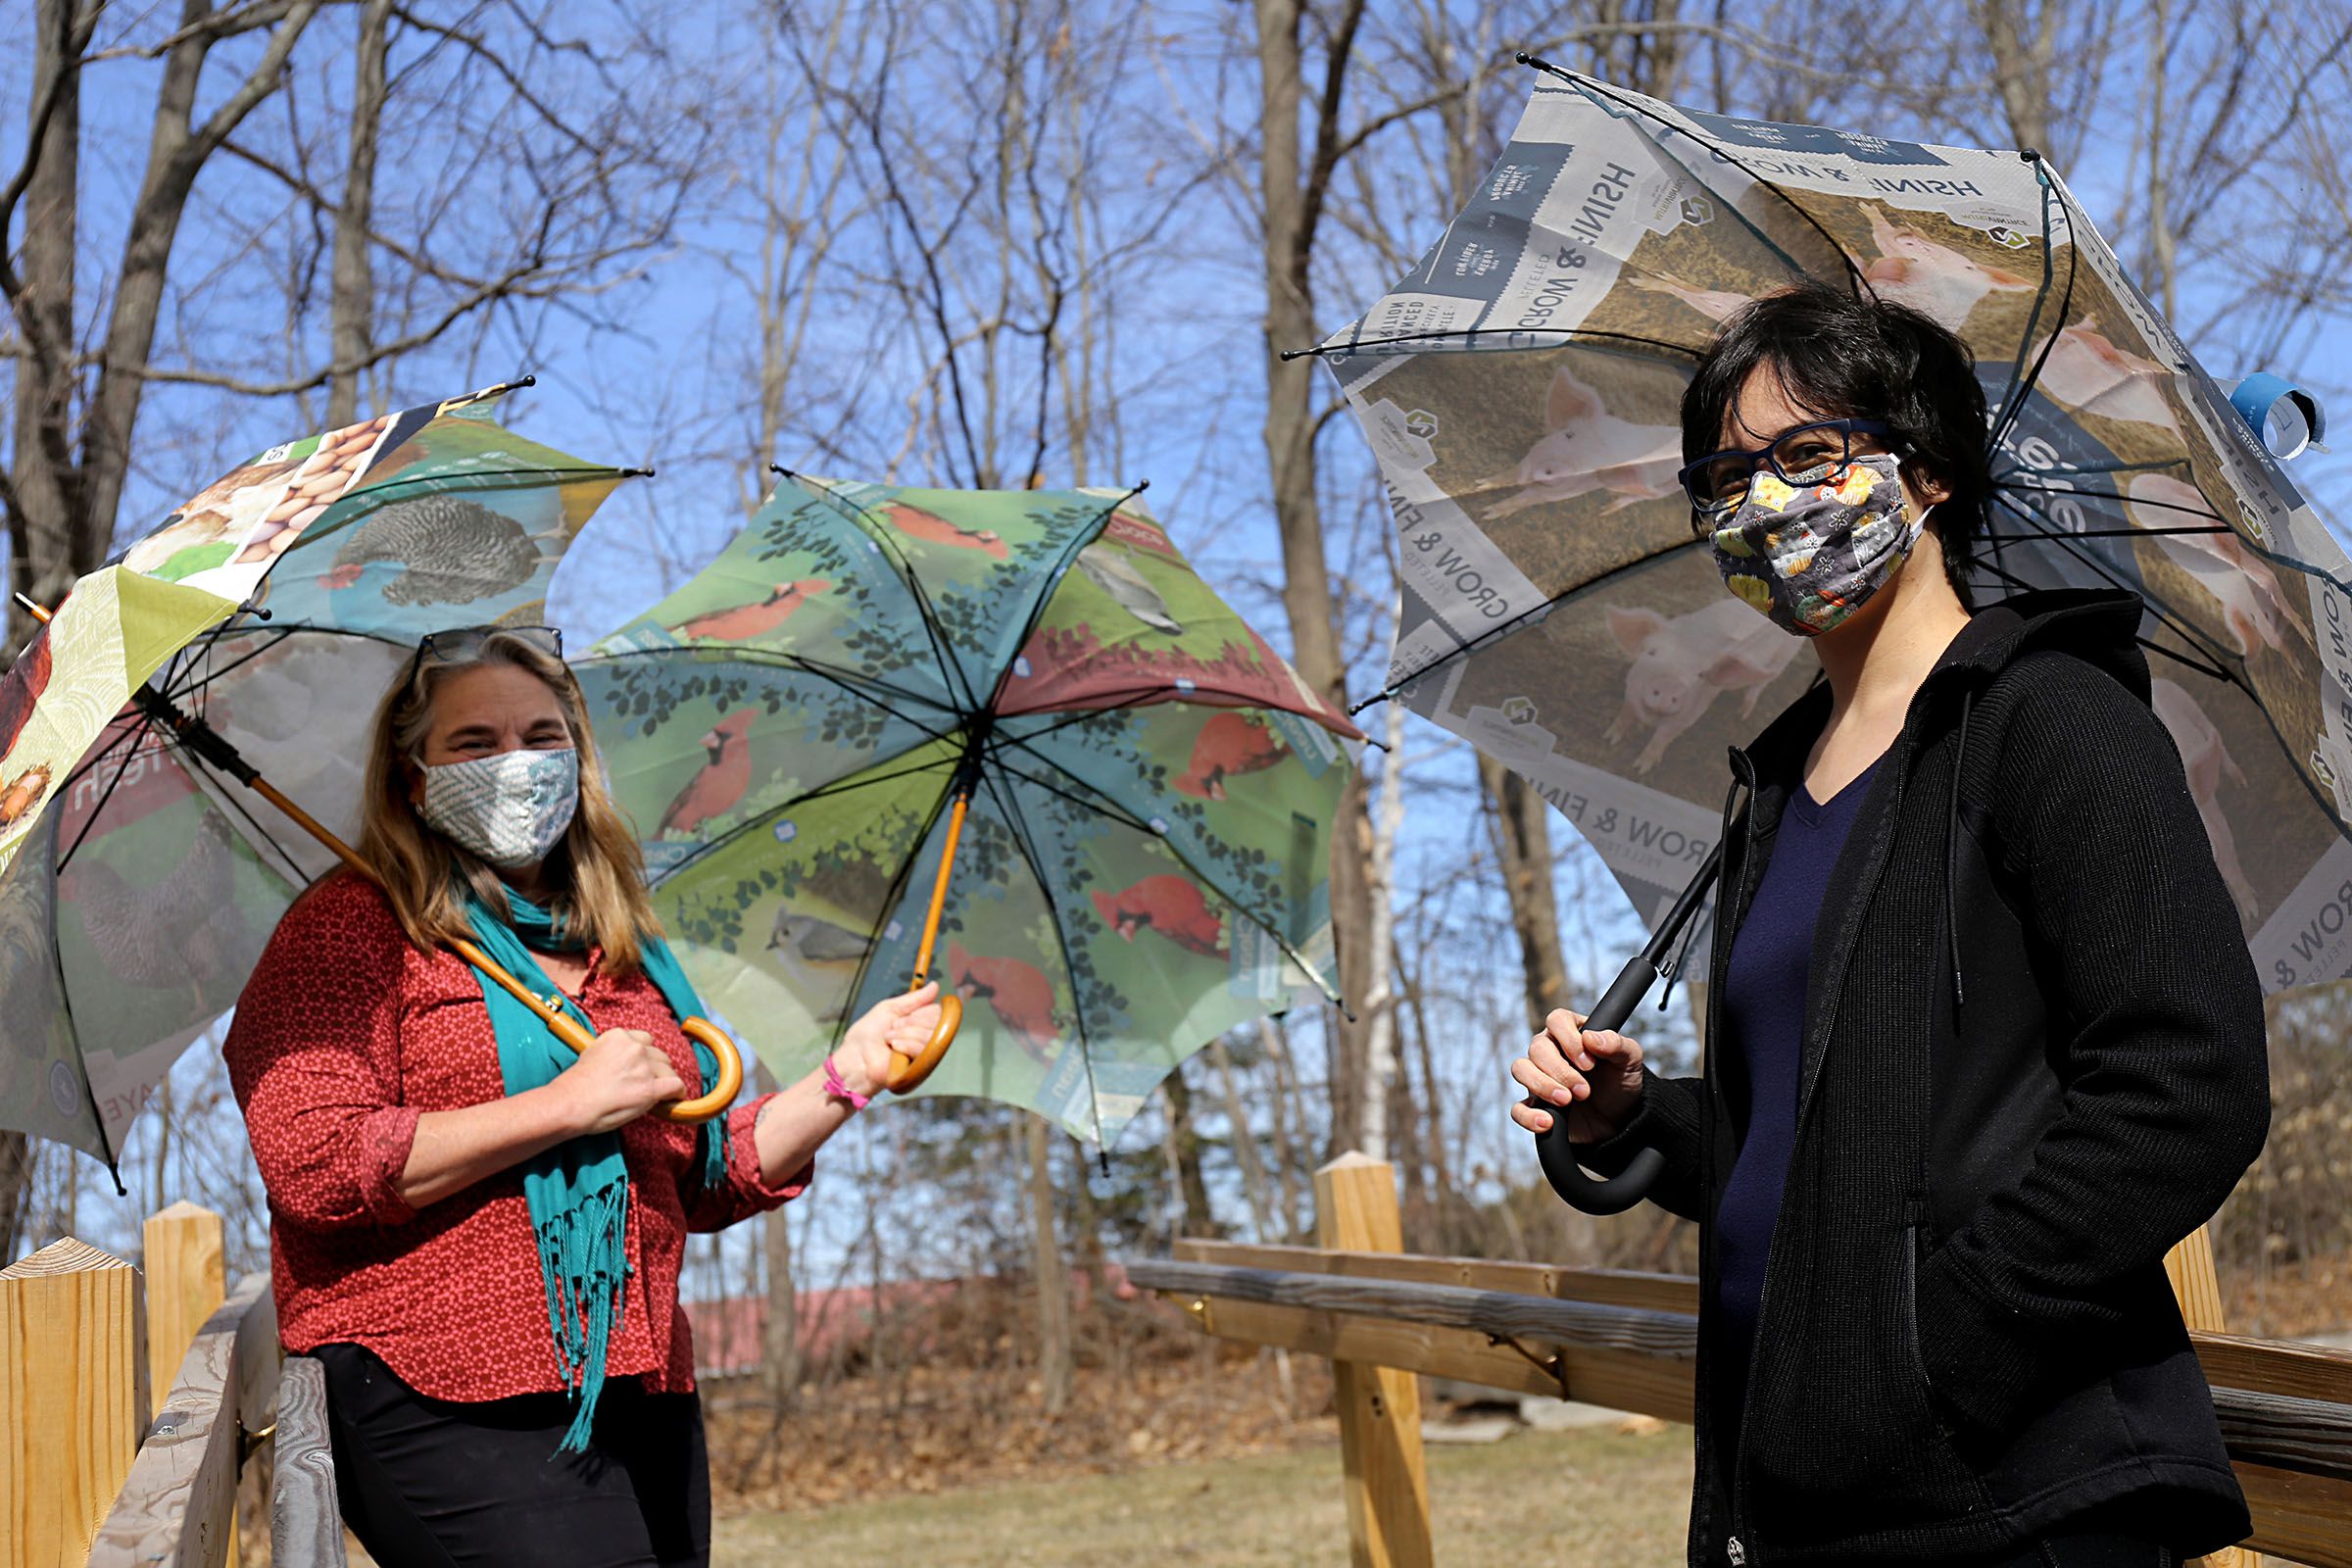 Families Learning Together participant Cherylynn Calfy, right, and Studio Worksite Supervisor Julia Dickenson display three of the over 200 umbrellas made from 50 lb. grain and birdseed bags at The Family Place in Wilder, Vt., on March 25, 2021. Over the past two years, participants in the Farm to Bag shop have made umbrellas and bags from recycled materials. "It's all about pushing skills forward," Dickenson said of the program. (Valley News - Geoff Hansen) Copyright Valley News. May not be reprinted or used online without permission. Send requests to permission@vnews.com.